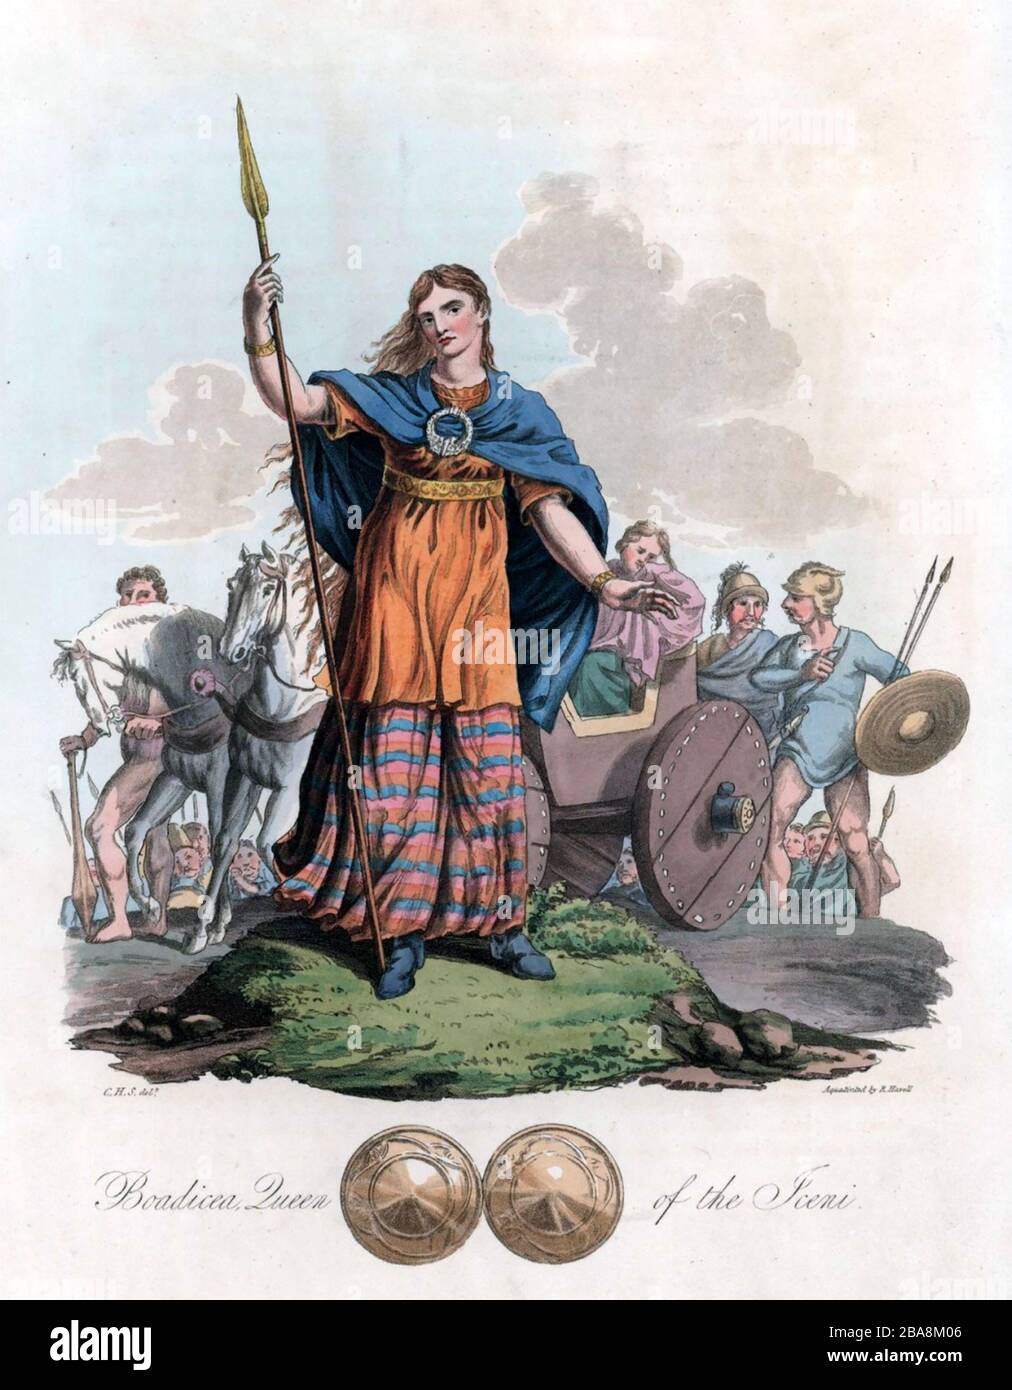 BOUDICA Queen of the Celtic Iceni tribe who led an uprising against the Roman occupation of part of England about AD 60. Engraving from 'The costume of the original inhabitants of the British Islands' published in 1815. Stock Photo